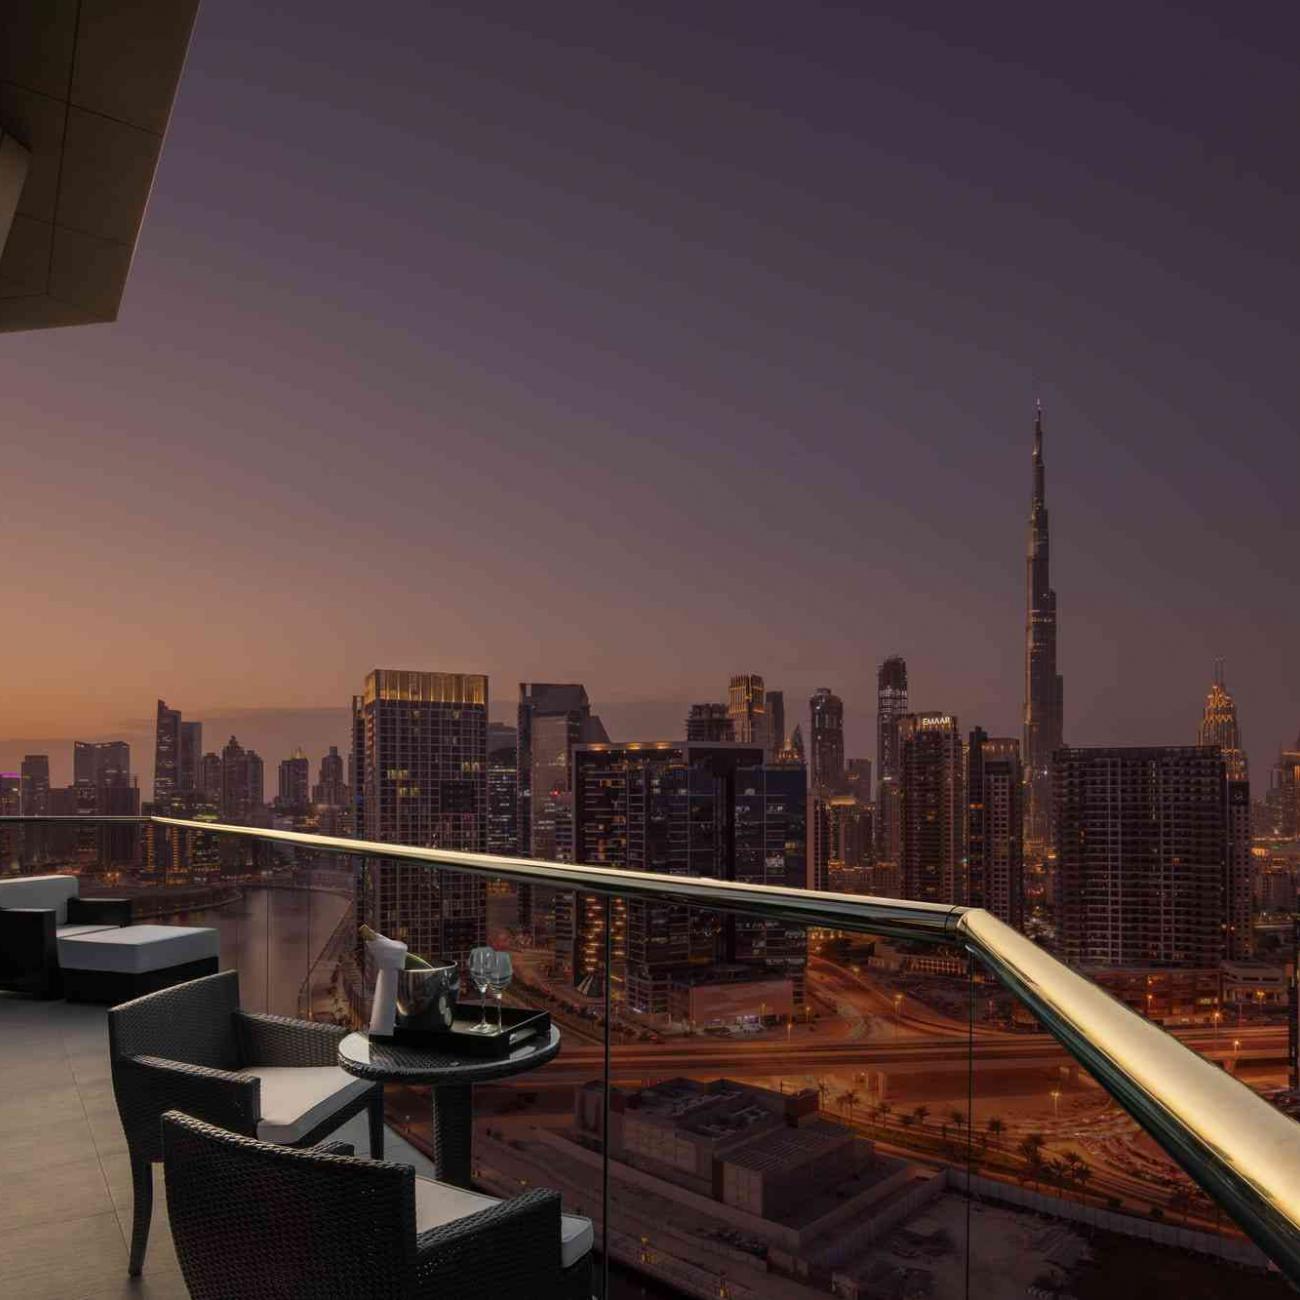 A view from the balcony displaying 2 chairs and coffee table overlooking Dubai city